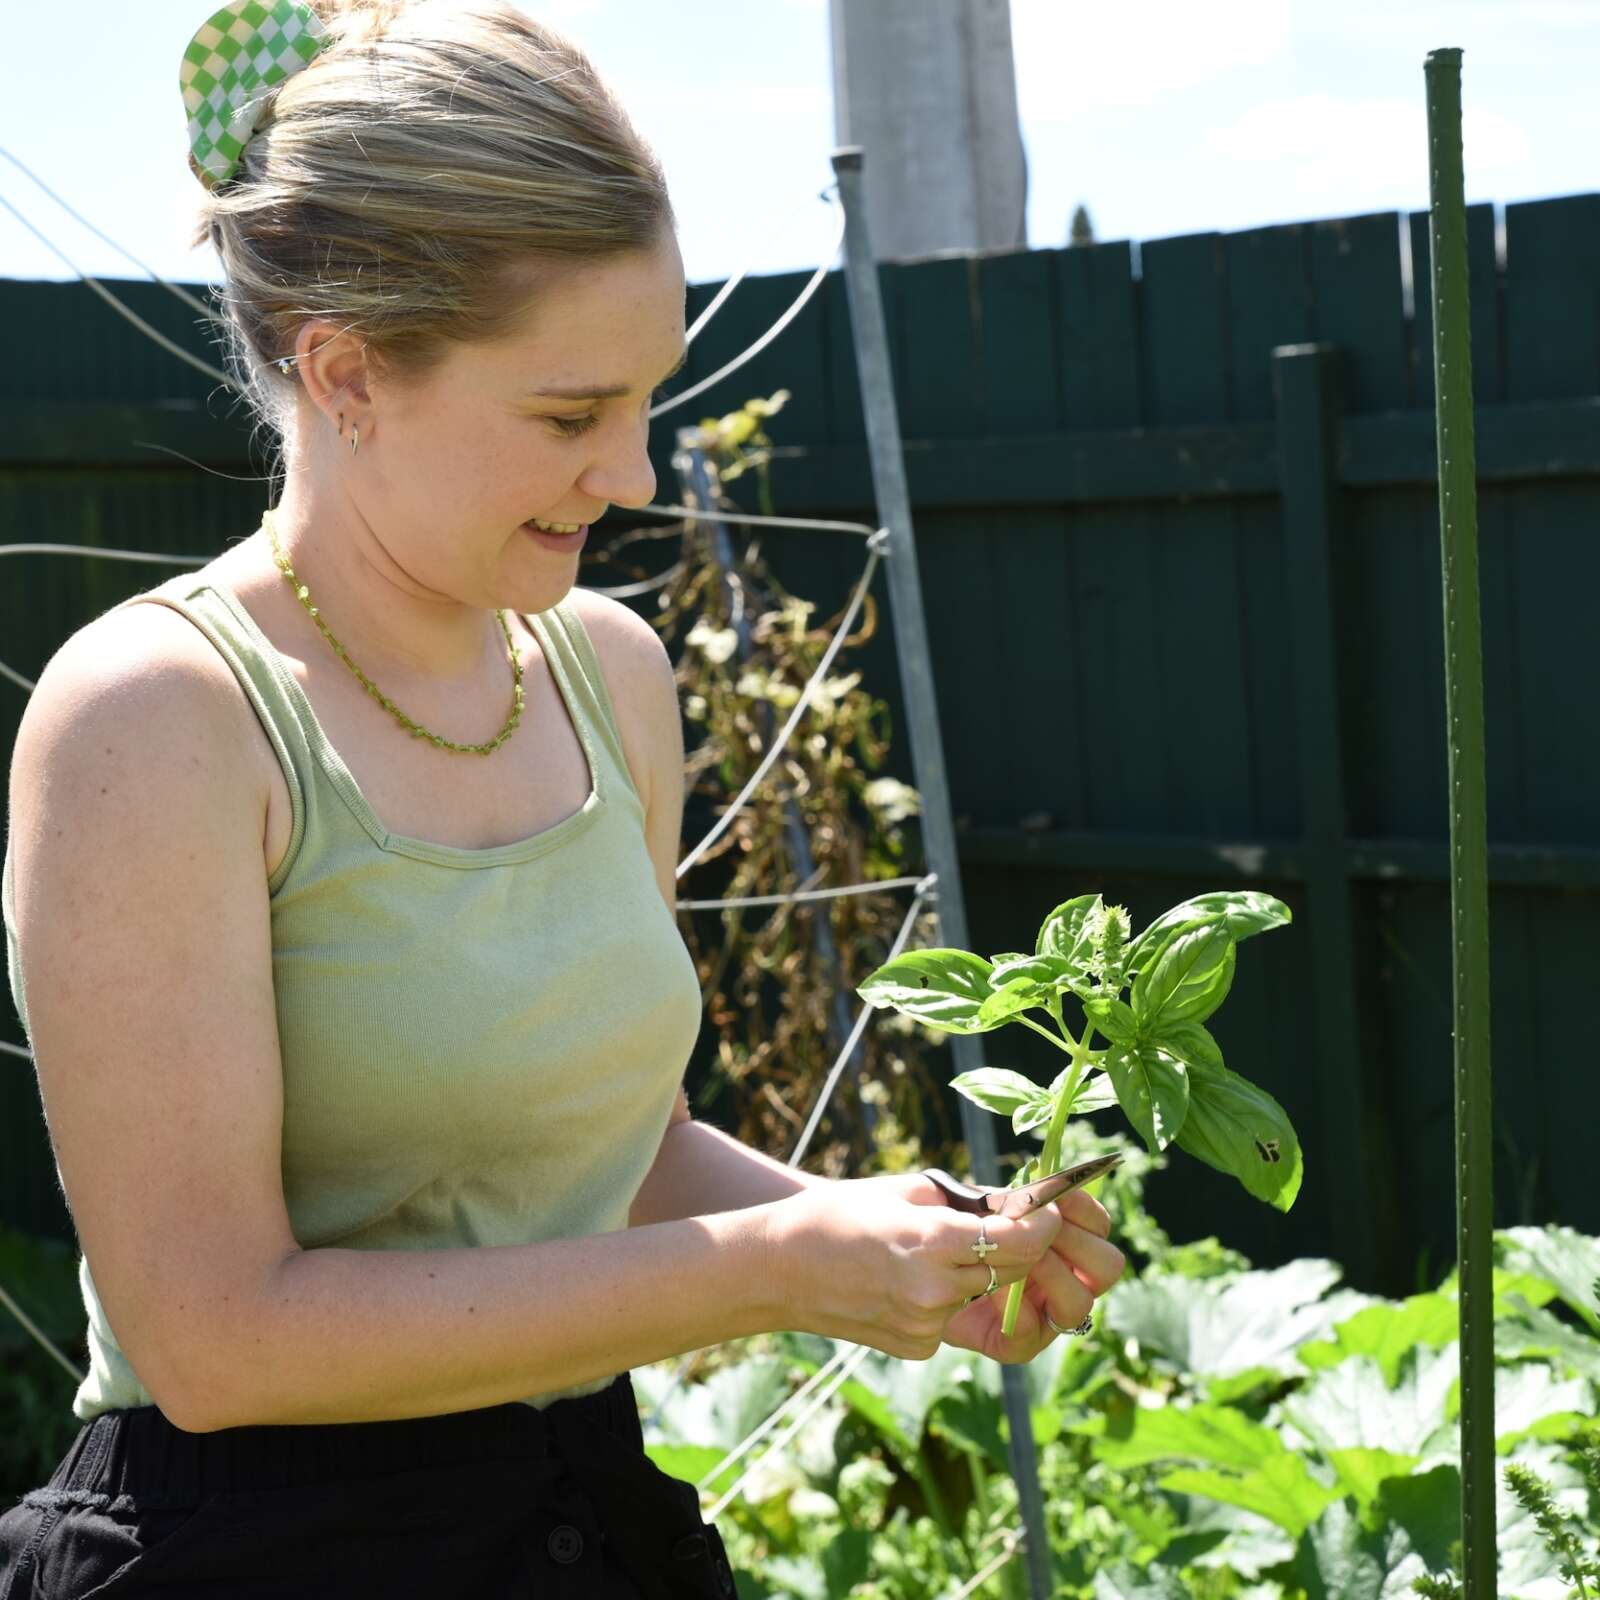 Ellen is a fair-skinned blond female with her hair tied back. She is gardening in a green singlet